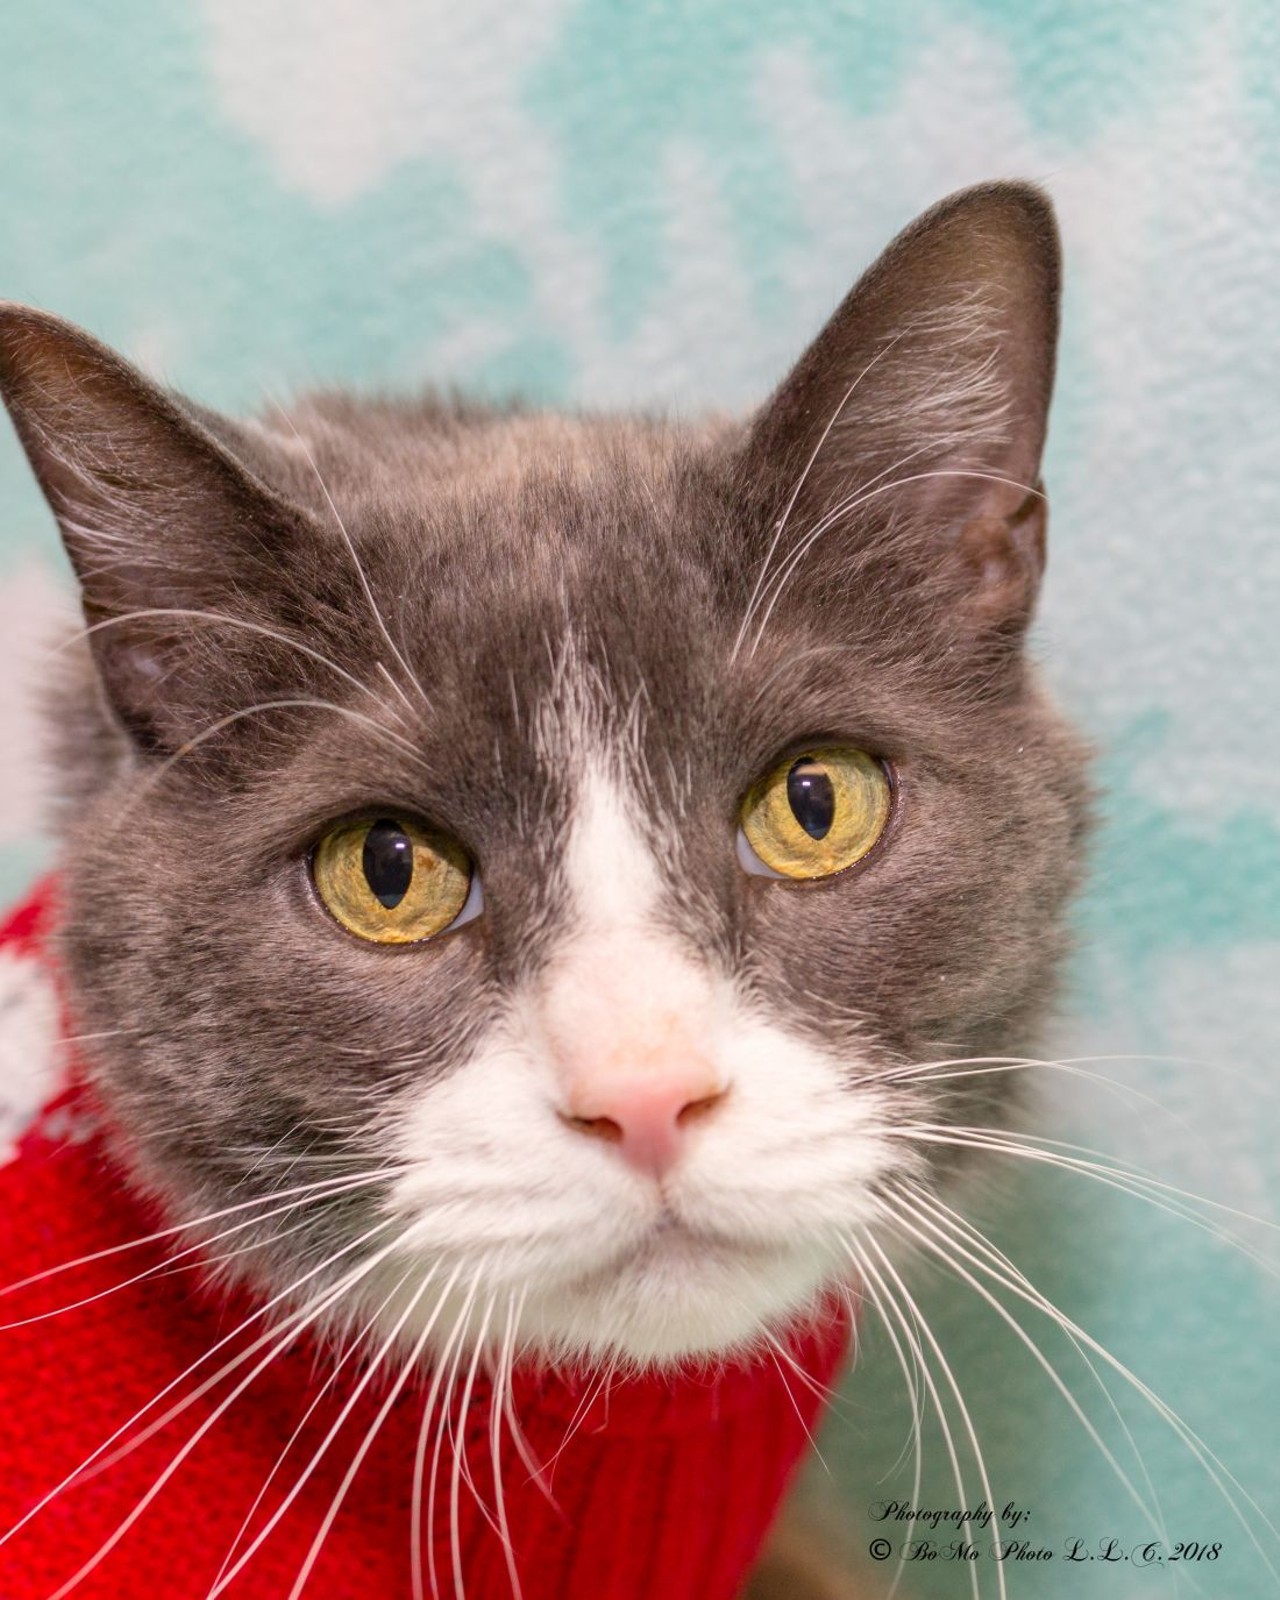 NAME: Max
GENDER: Male
BREED: Domestic Short Hair
AGE: 11 years, 6 months
WEIGHT: 15 pounds
SPECIAL CONSIDERATIONS: None
REASON I CAME TO MHS: Owner surrender
LOCATION: Petco of Sterling Heights
ID NUMBER: 862460